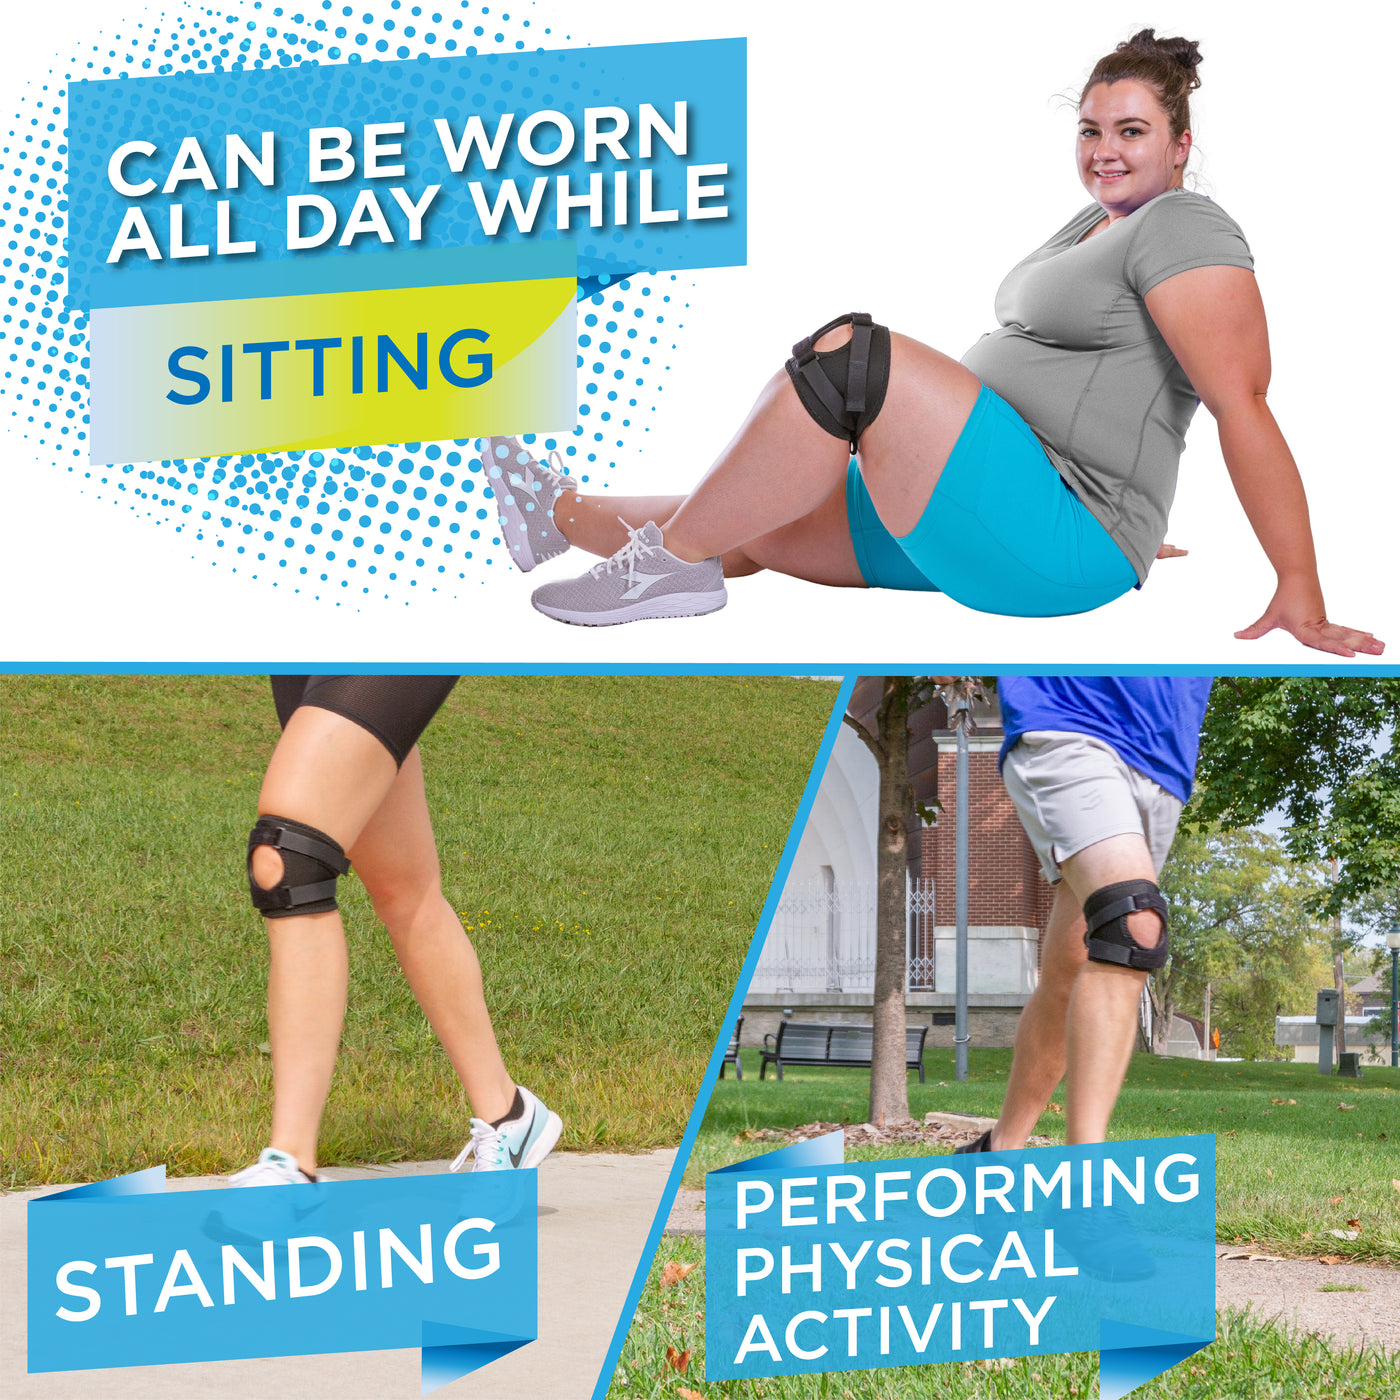 The running knee support can be worn all day while sitting, standing, and performing activities